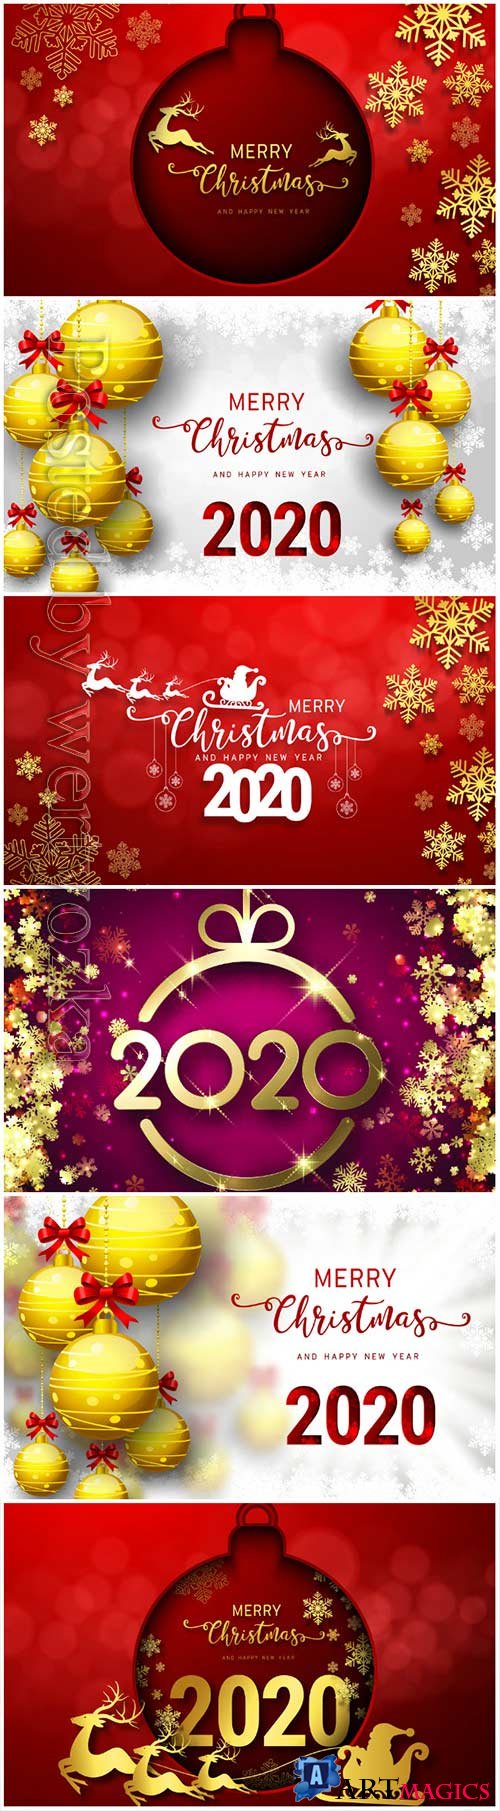 2020 Merry Chistmas and Happy New Year vector illustration # 11